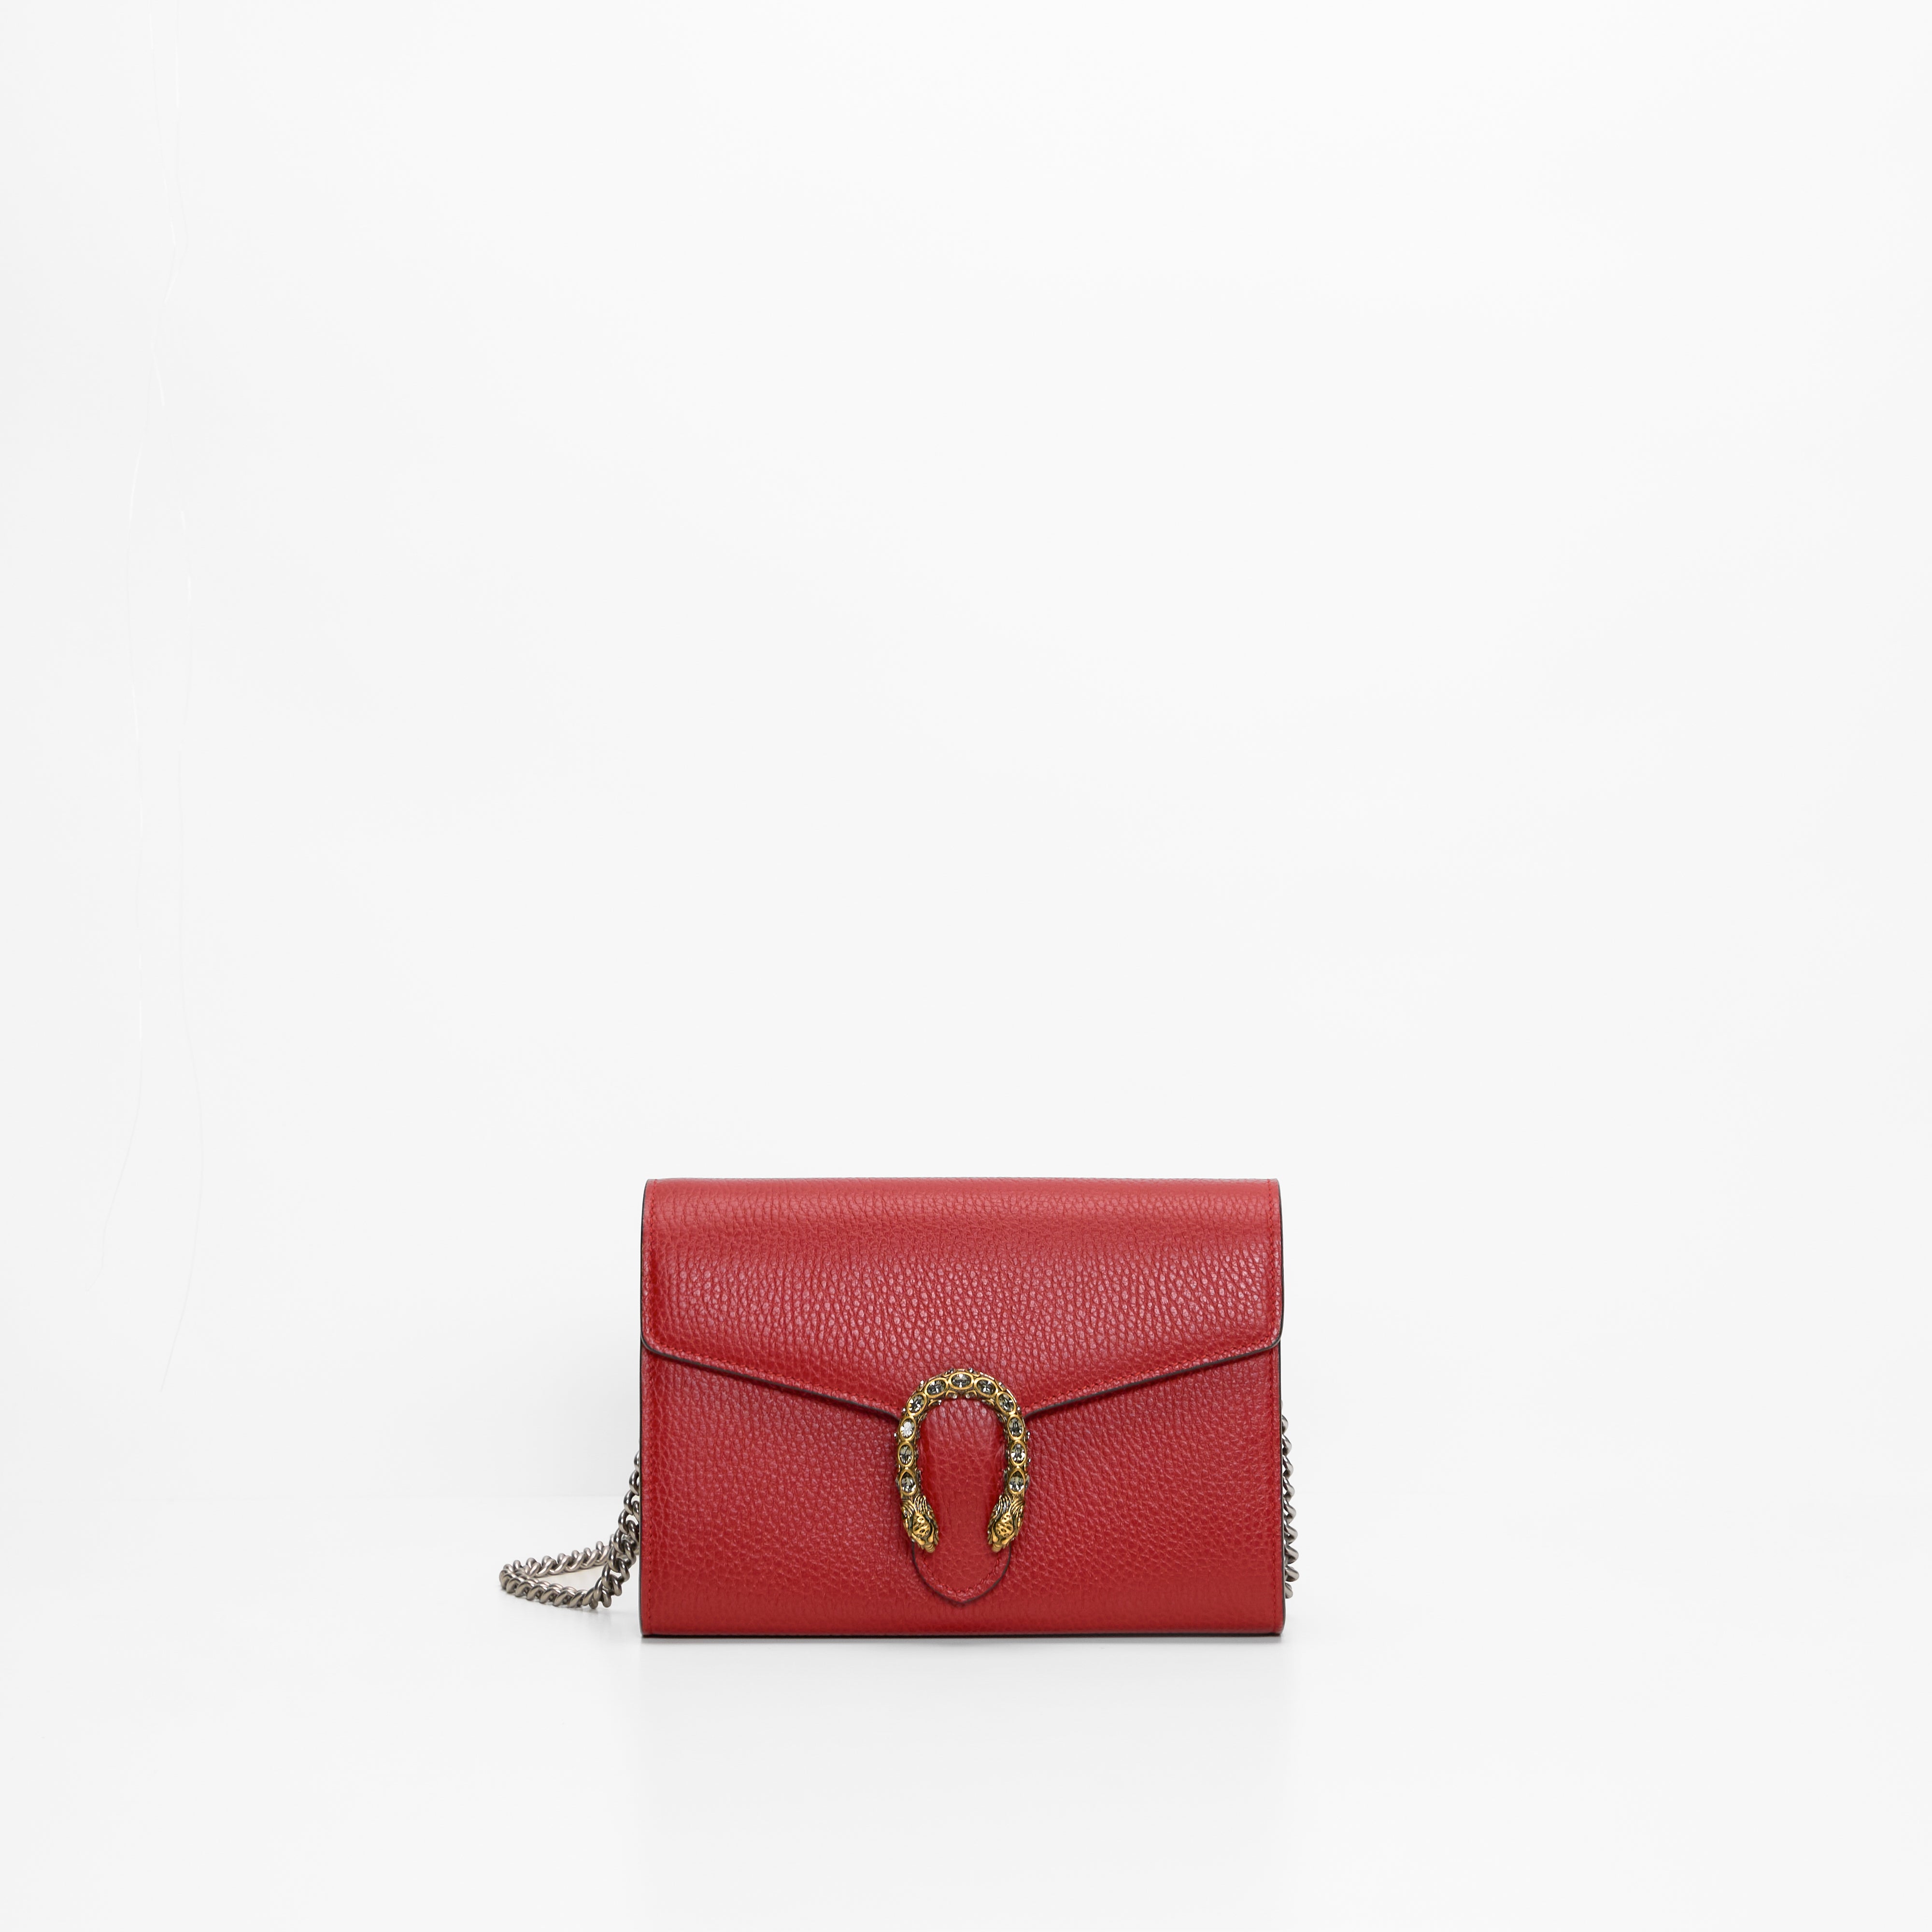 GUCCI DIONYSUS IN RED